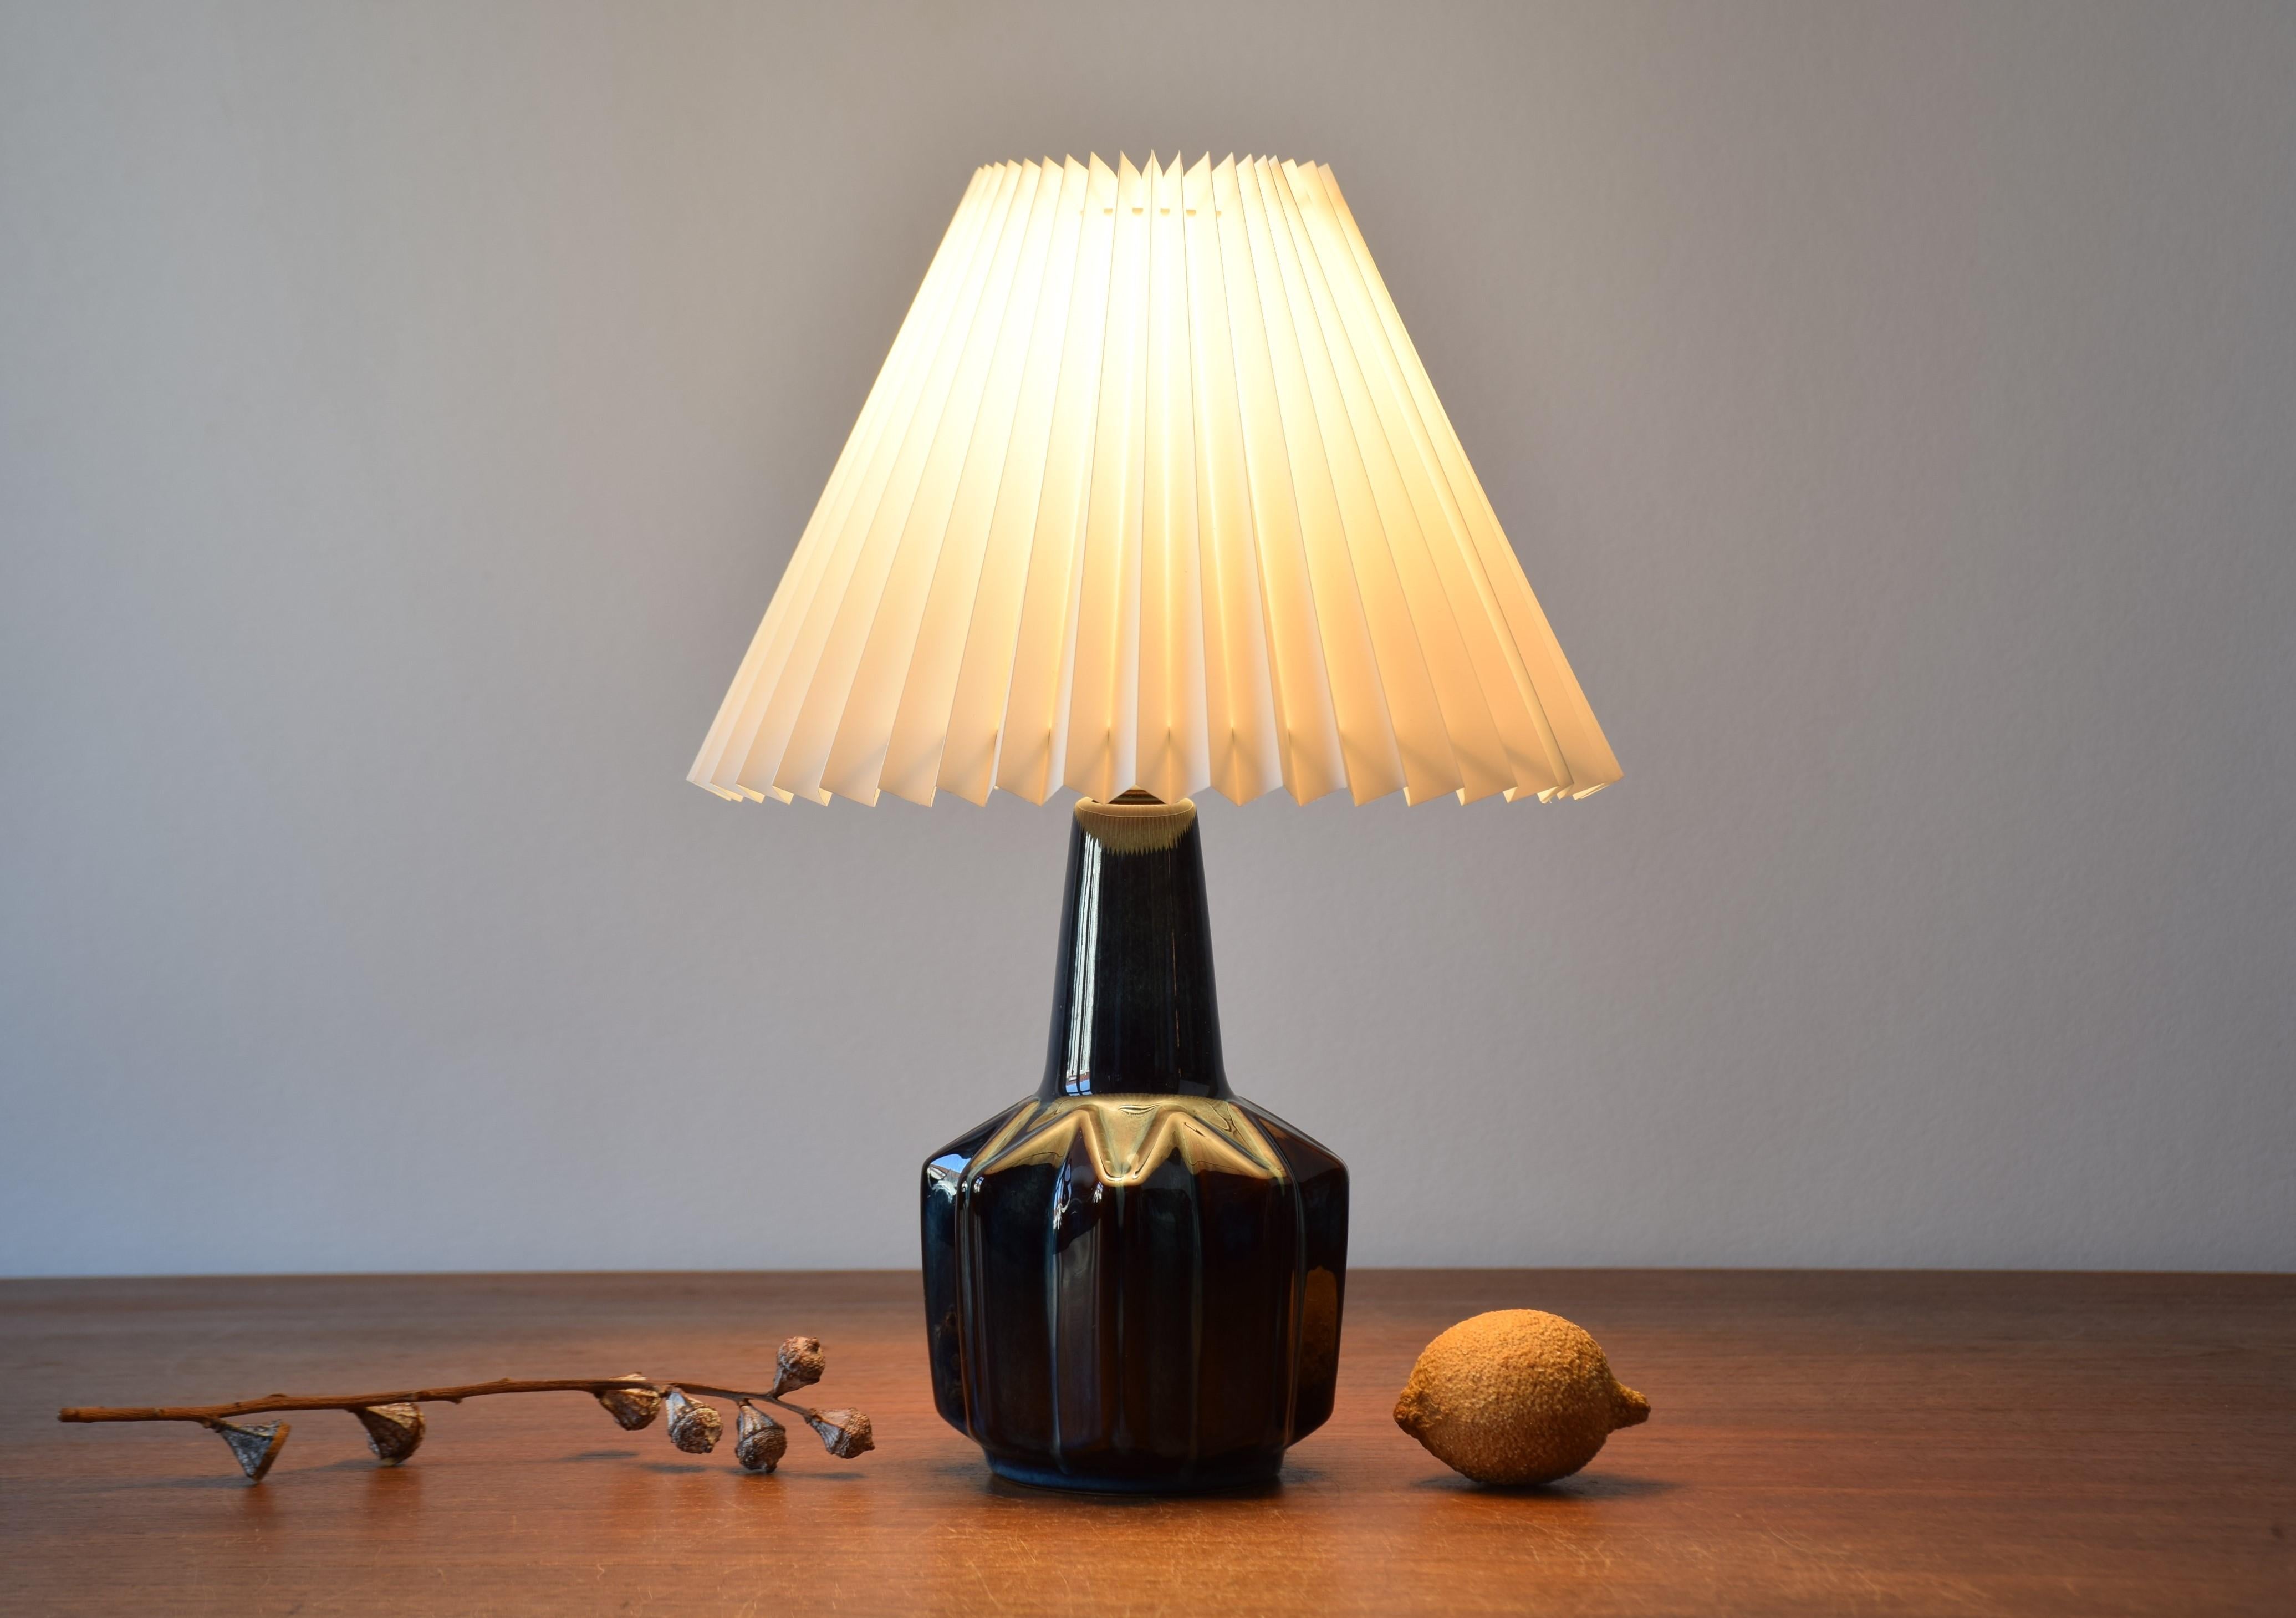 Sculptural mid-century Danish ceramic table lamp designed by Einar Johansen for Søholm Stentøj, Denmark. Made circa 1960s.

The lamp has a vivid glossy glaze in a dark blue with paler blue and brown elements. 

Included is a new clip on bulb